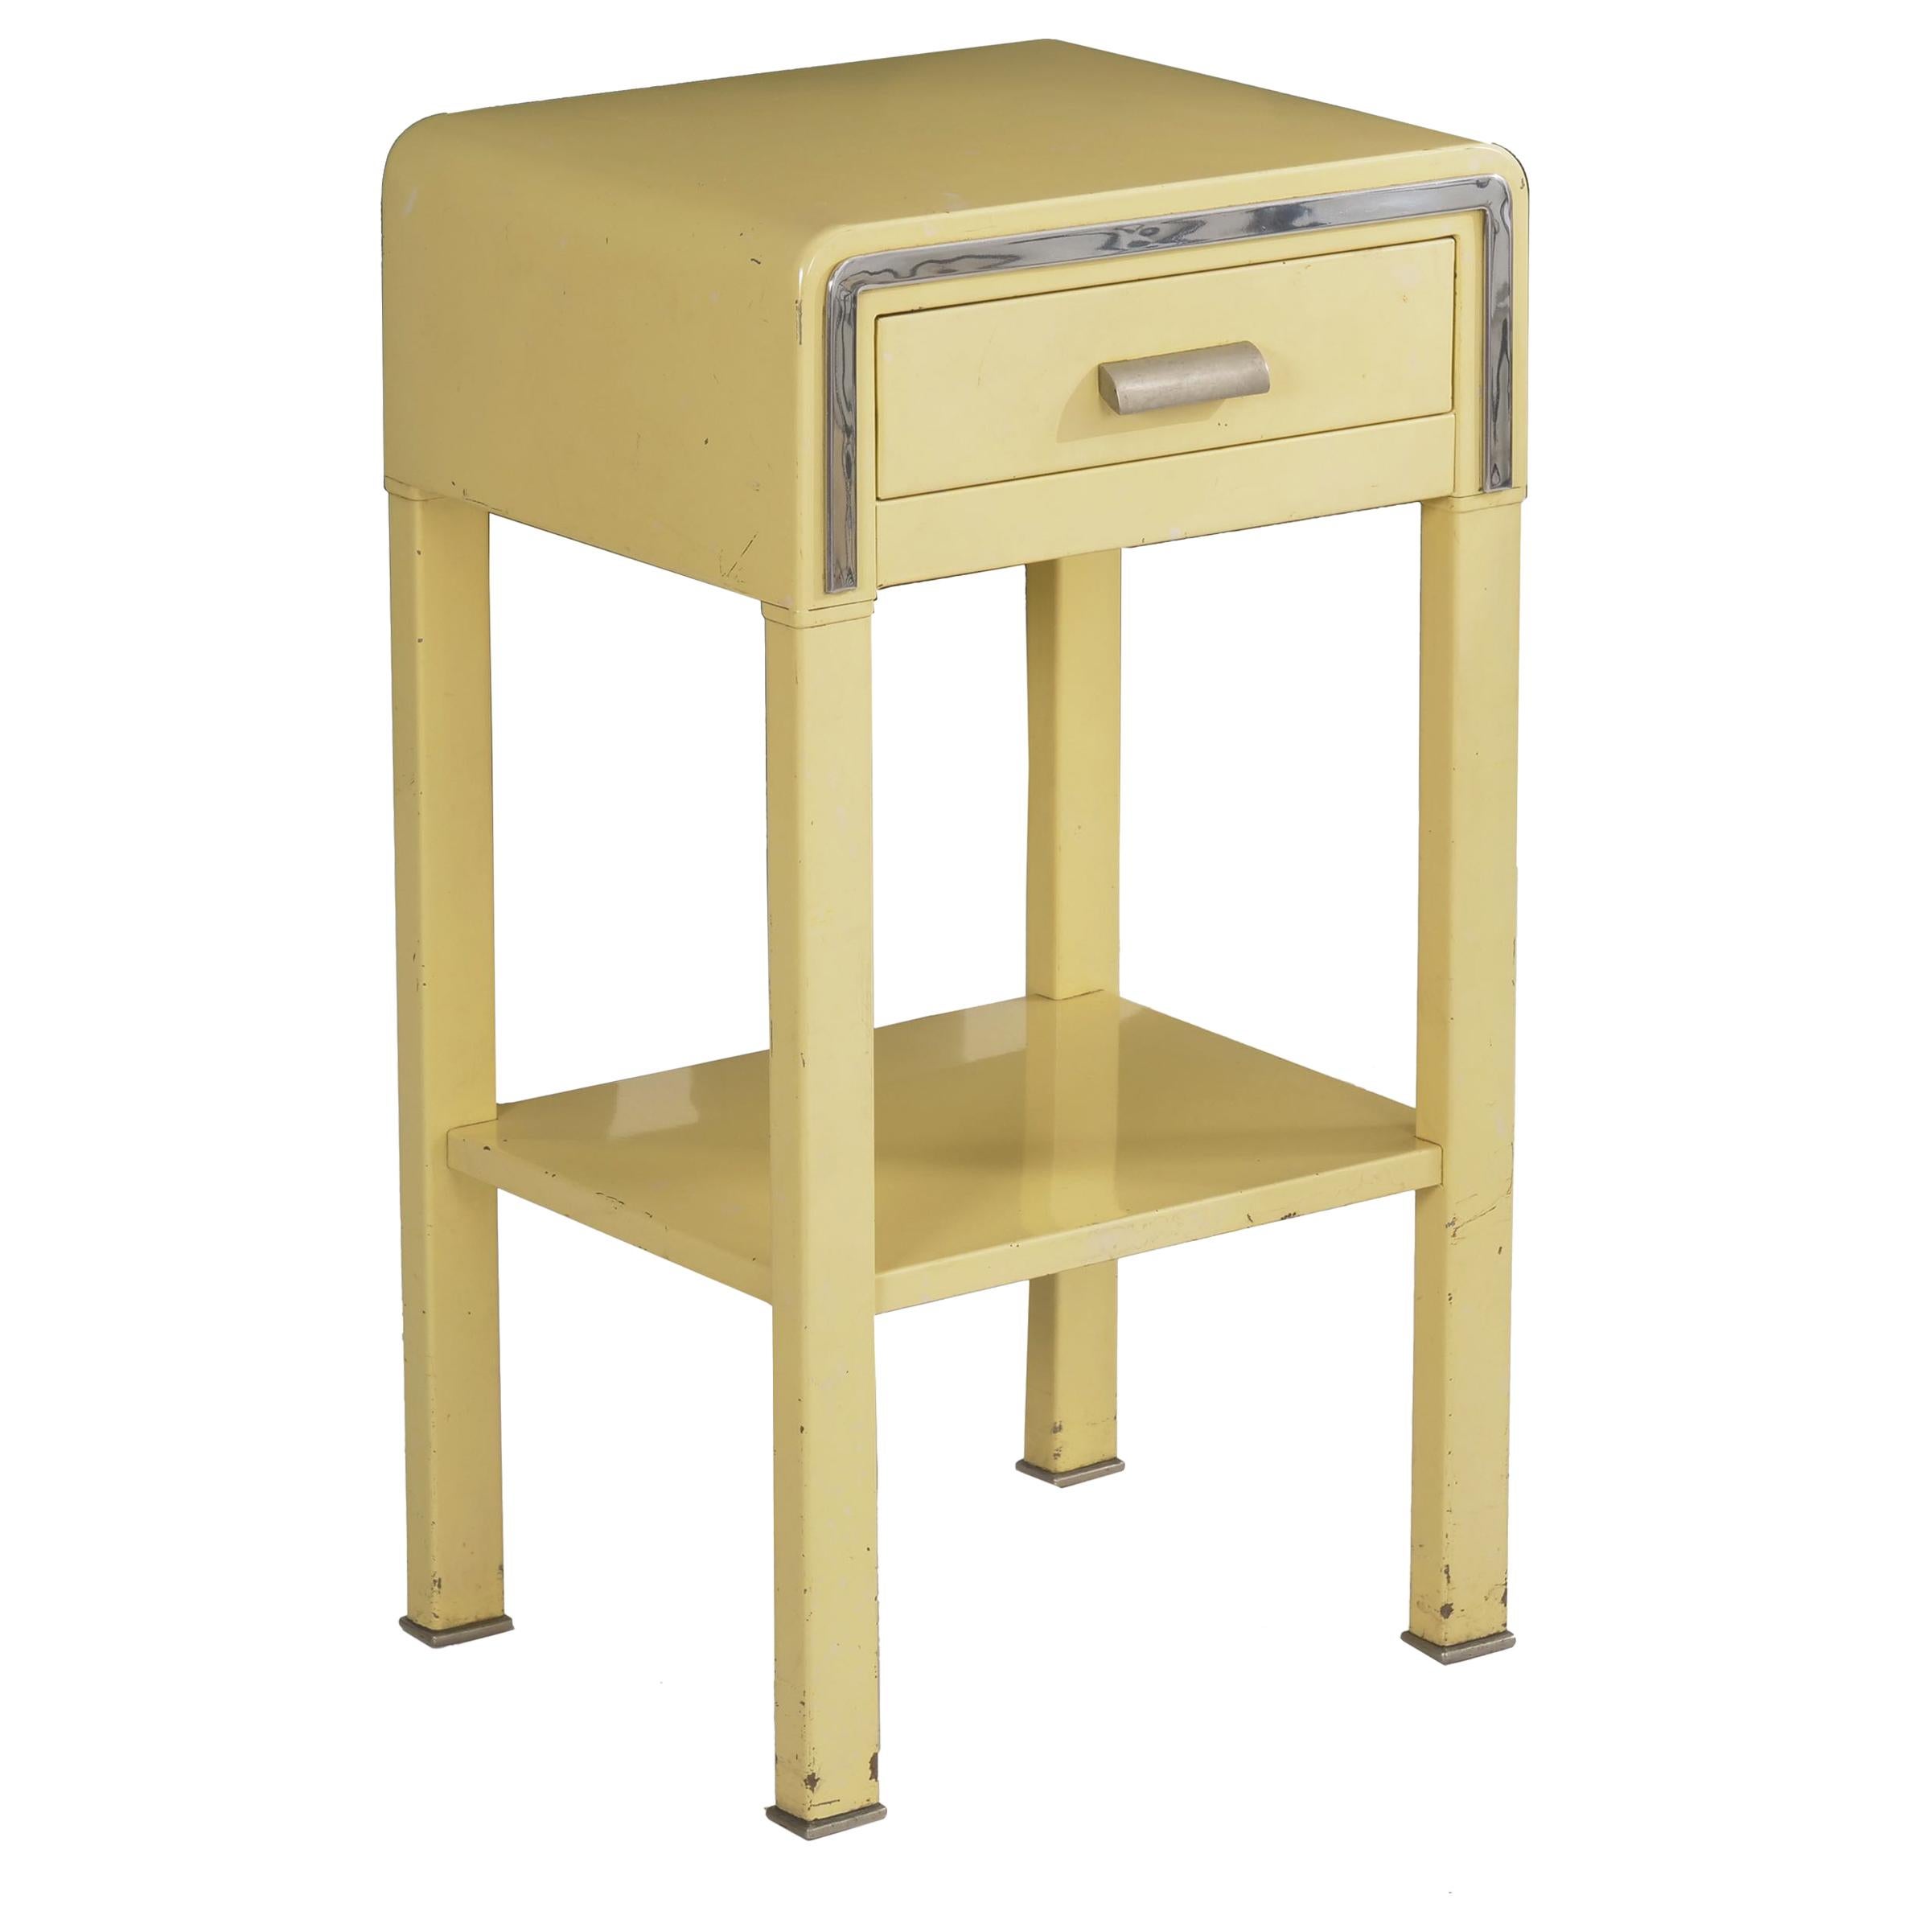 Streamline Moderne Nightstand Table by Norman Bel Geddes for Simmons